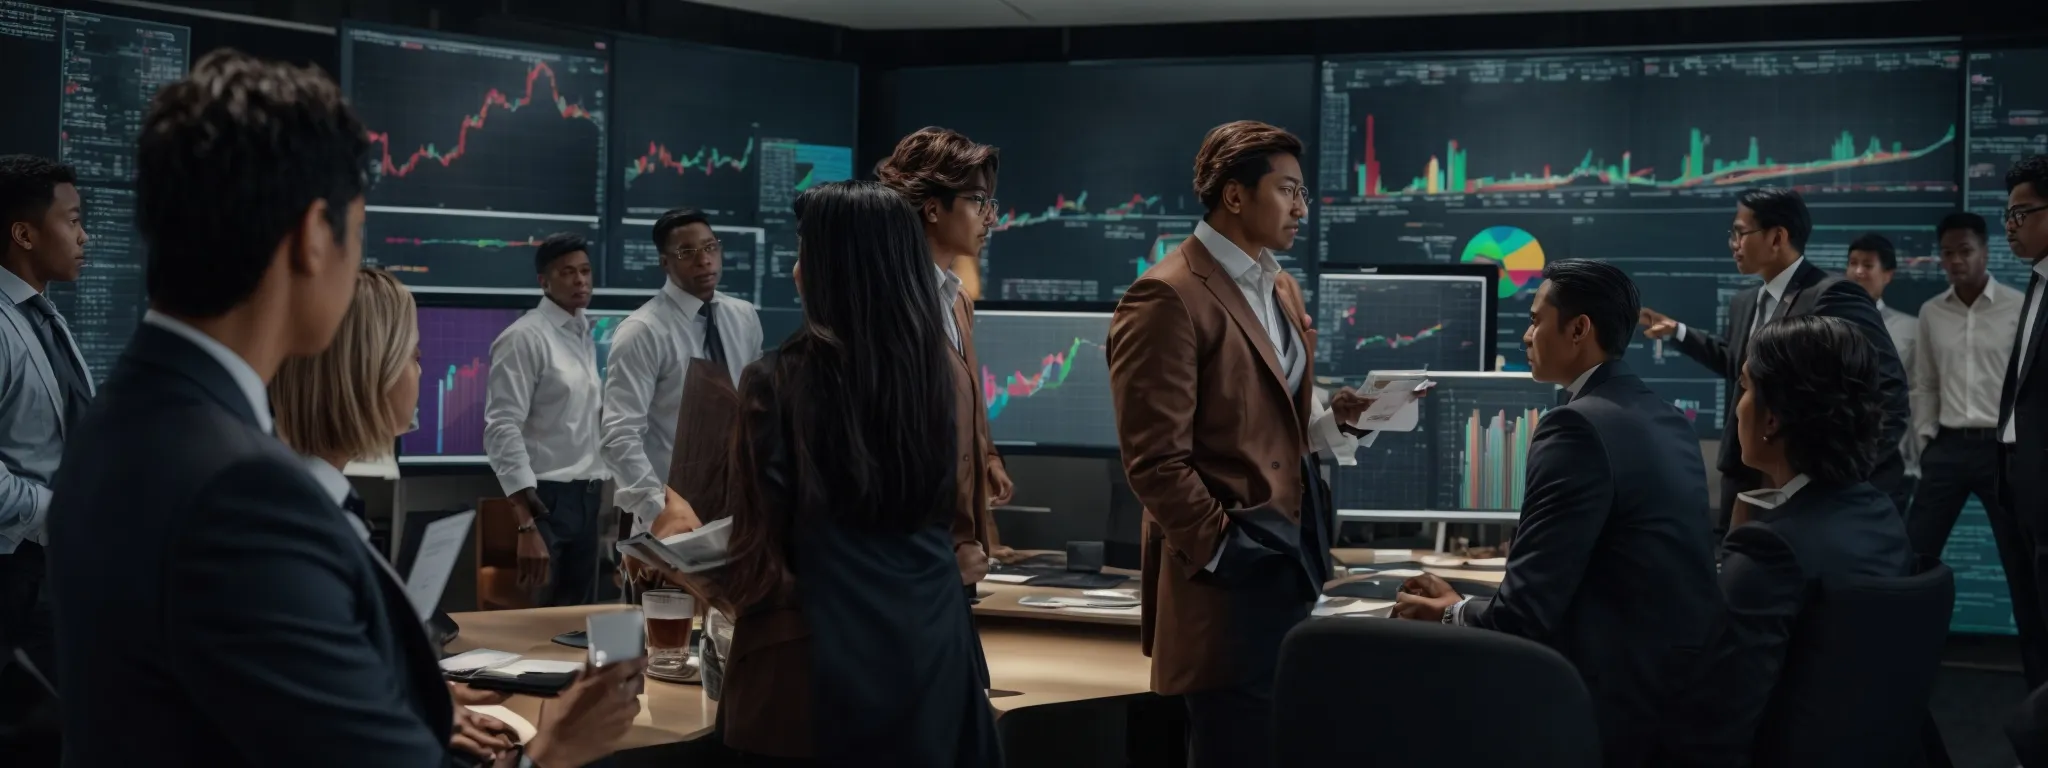 a diverse group of business professionals gathers around a large screen displaying colorful graphs and charts, enthusiastically discussing strategies.